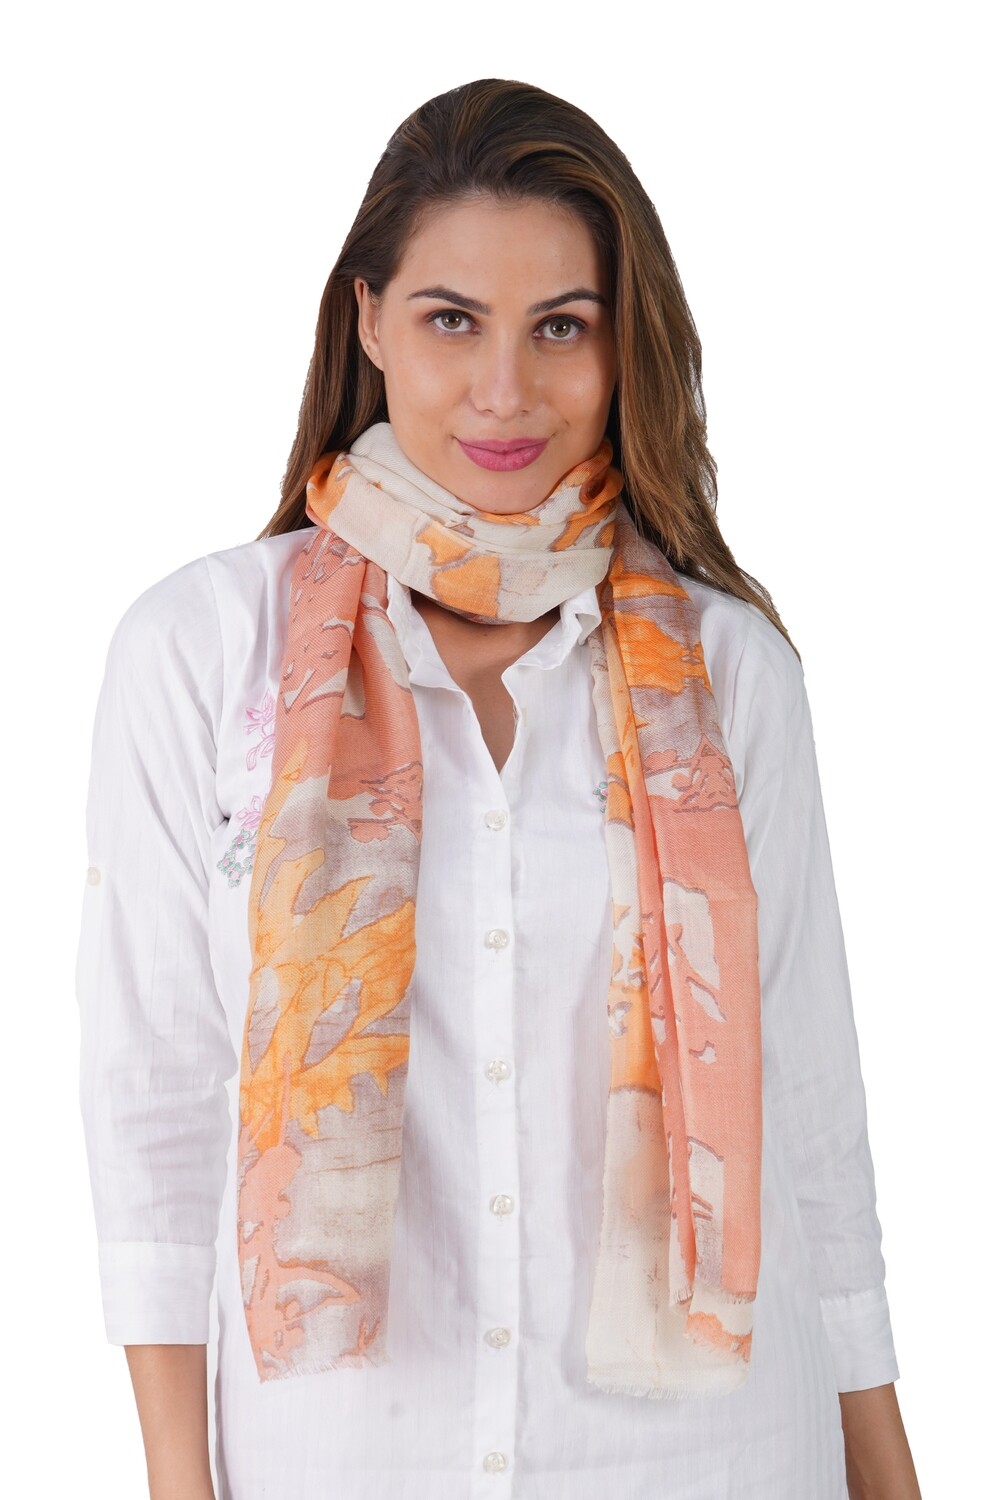 15 Best Scarves for Women to Give as Gifts 2018